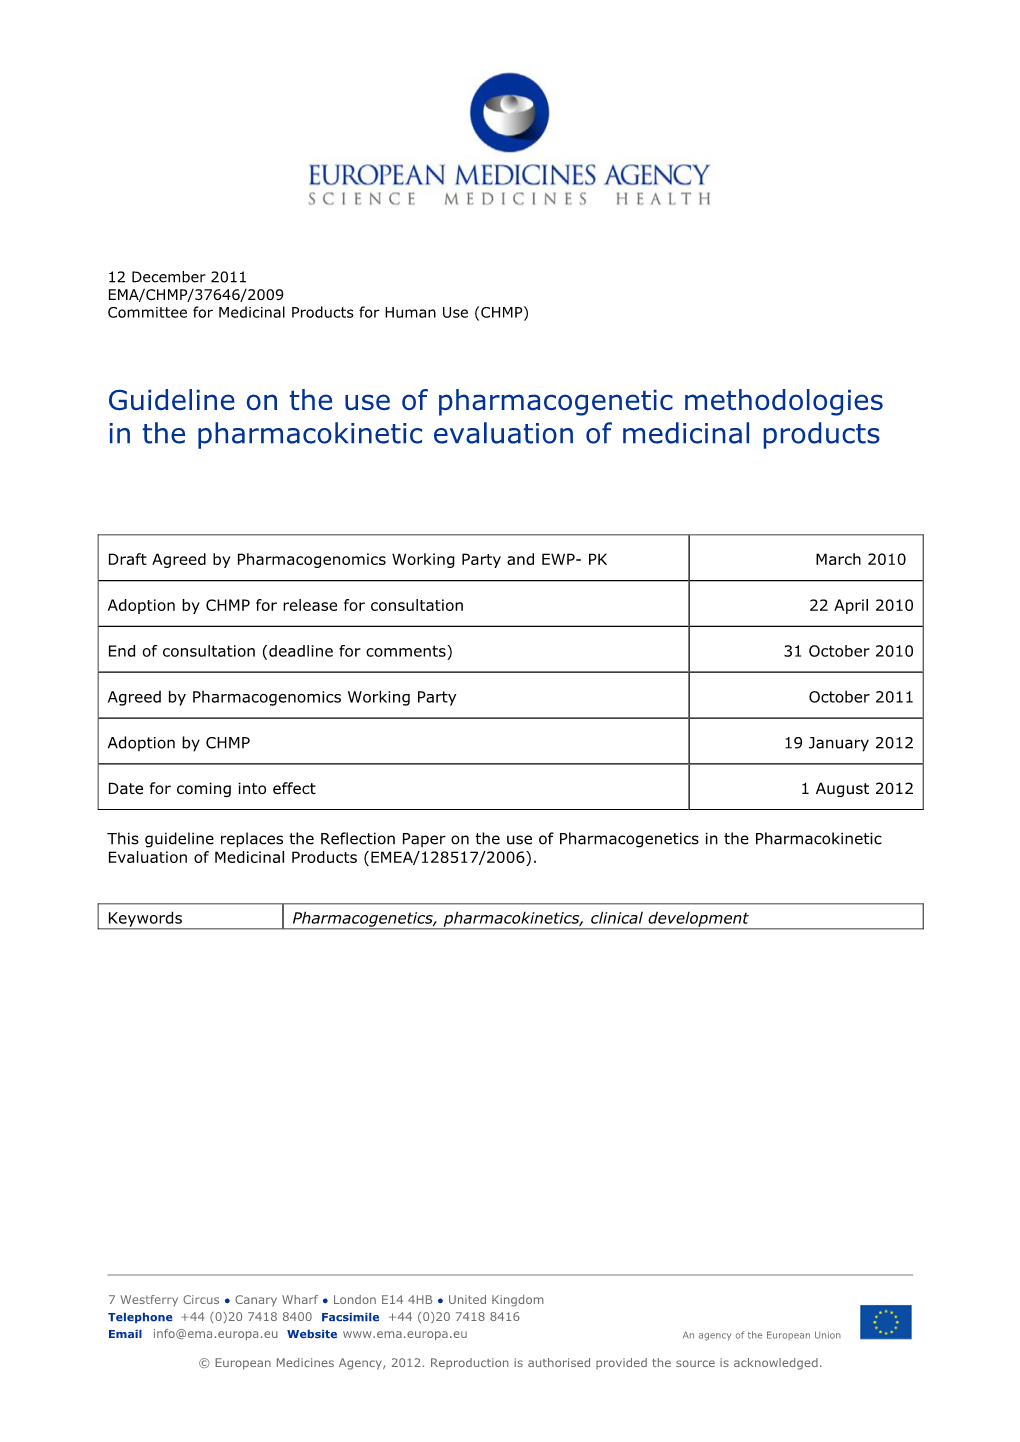 Guideline on the Use of Pharmacogenetic Methodologies in the Pharmacokinetic Evaluation of Medicinal Products